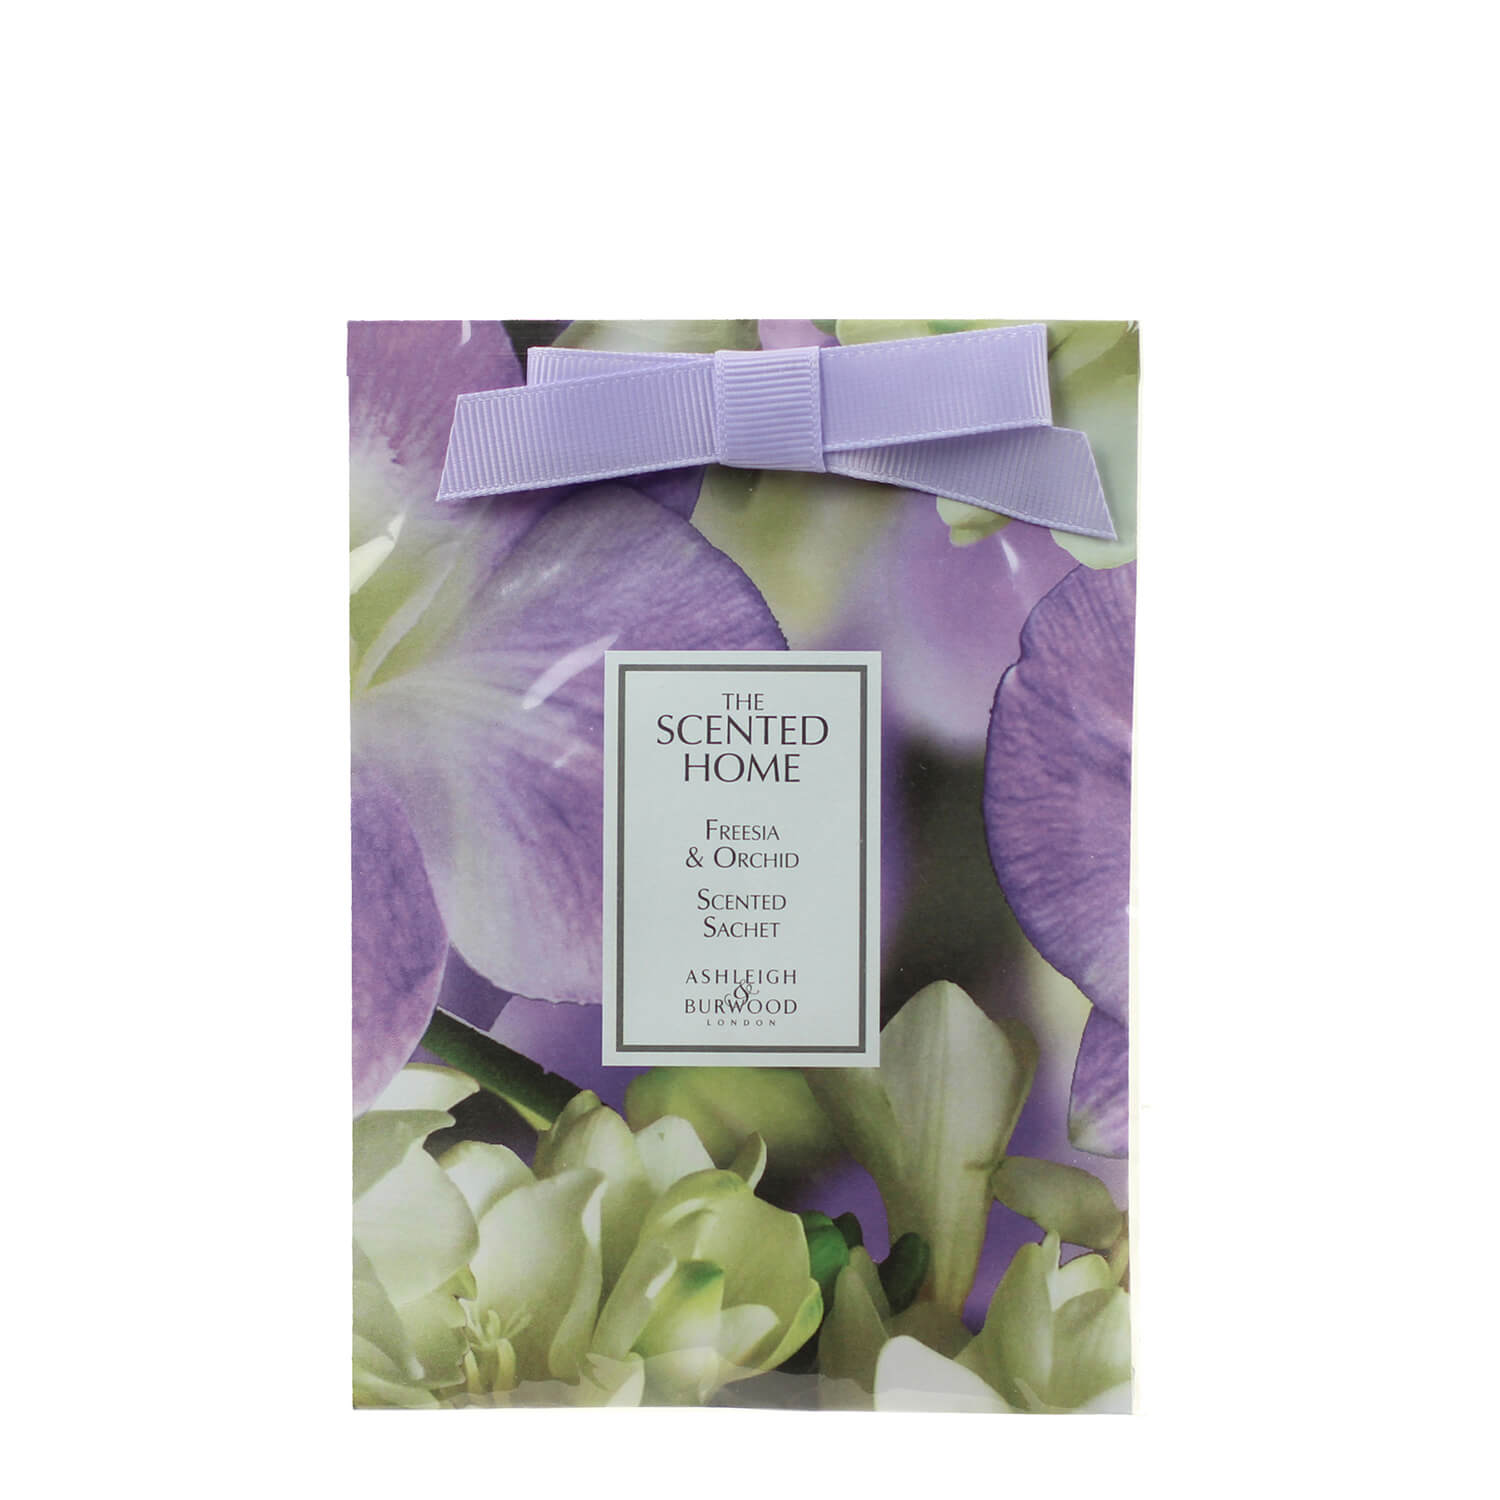 Ashleigh &amp; Burwood Scented Home Sachet - Freesia &amp; Orchid 1 Shaws Department Stores